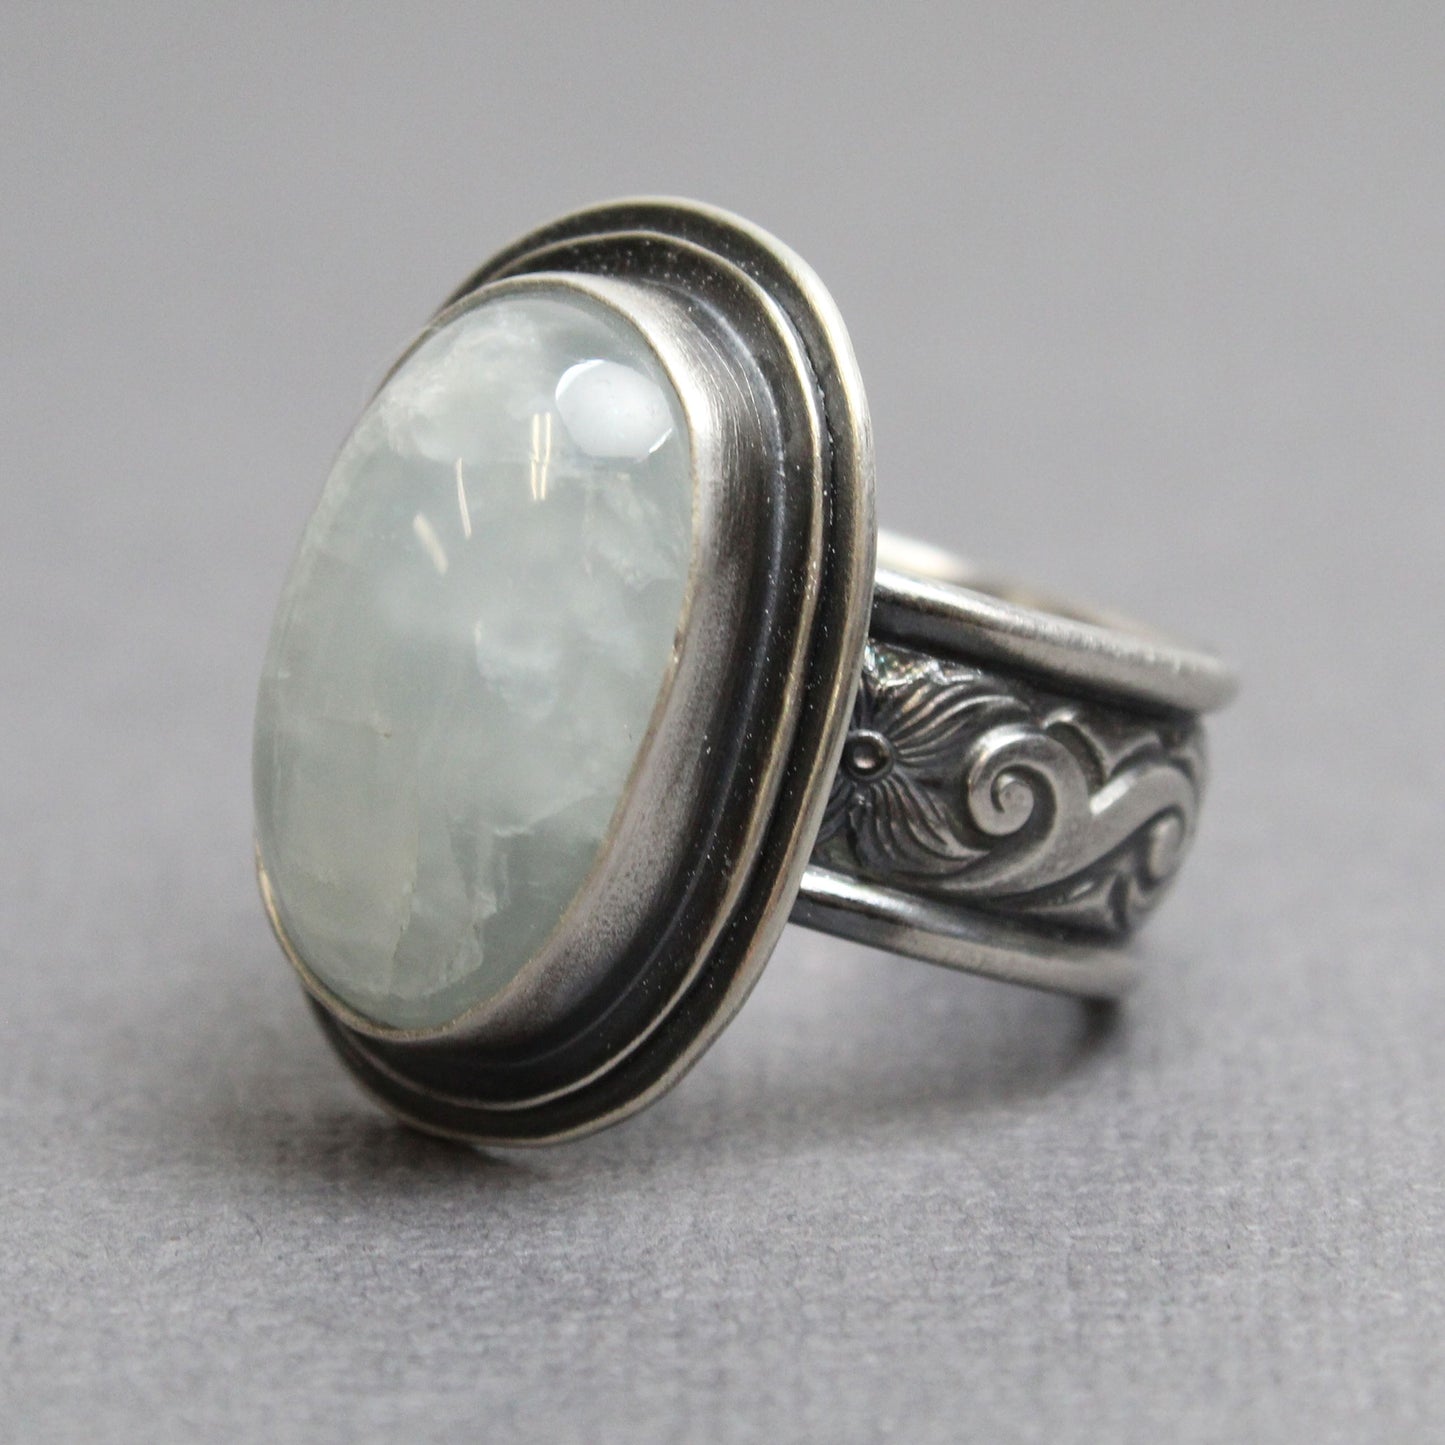 Load image into Gallery viewer, Aquamarine Ring in 925 Sterling Silver, Size 8 US
